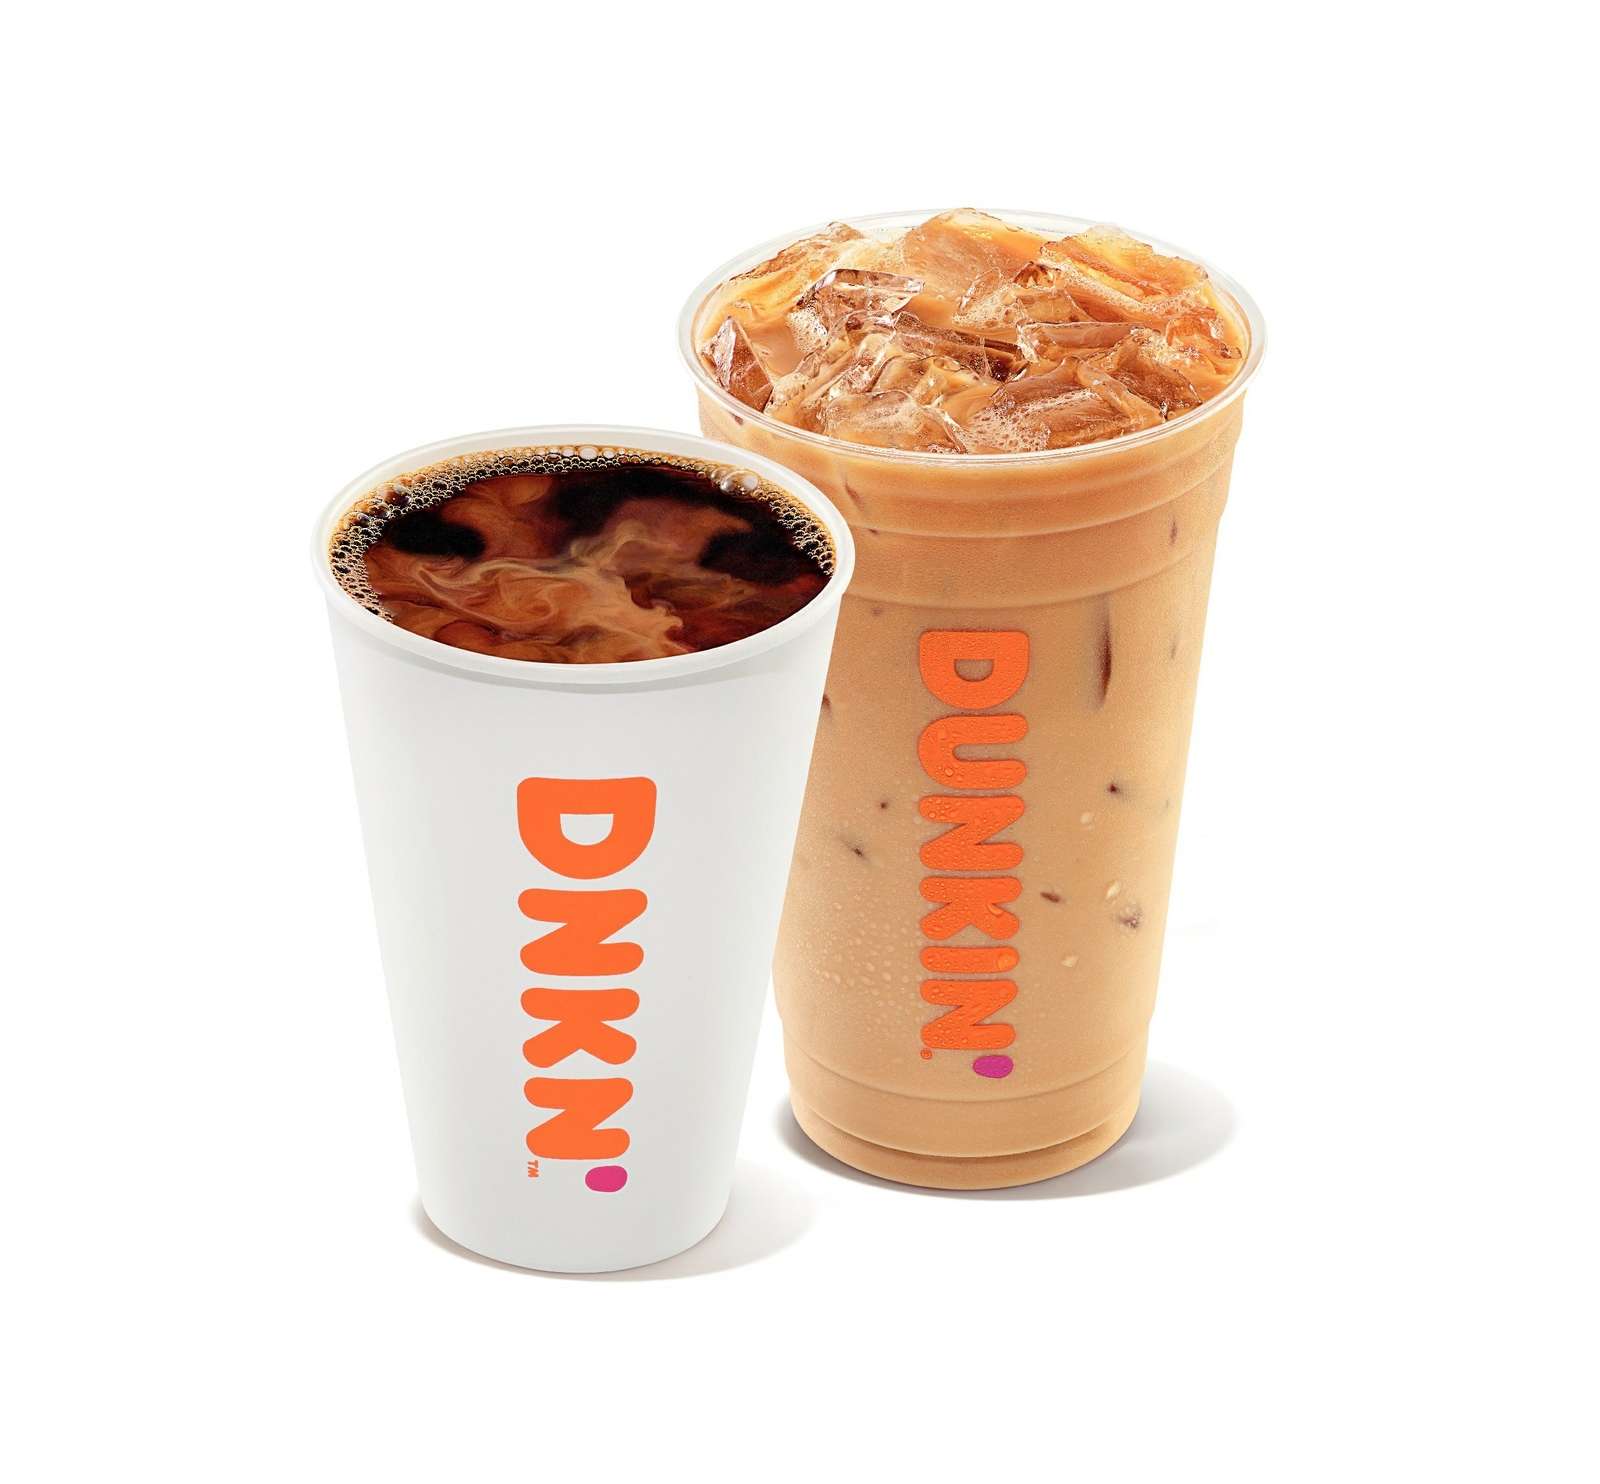 Does Dunkin Do Decaf Iced Coffee